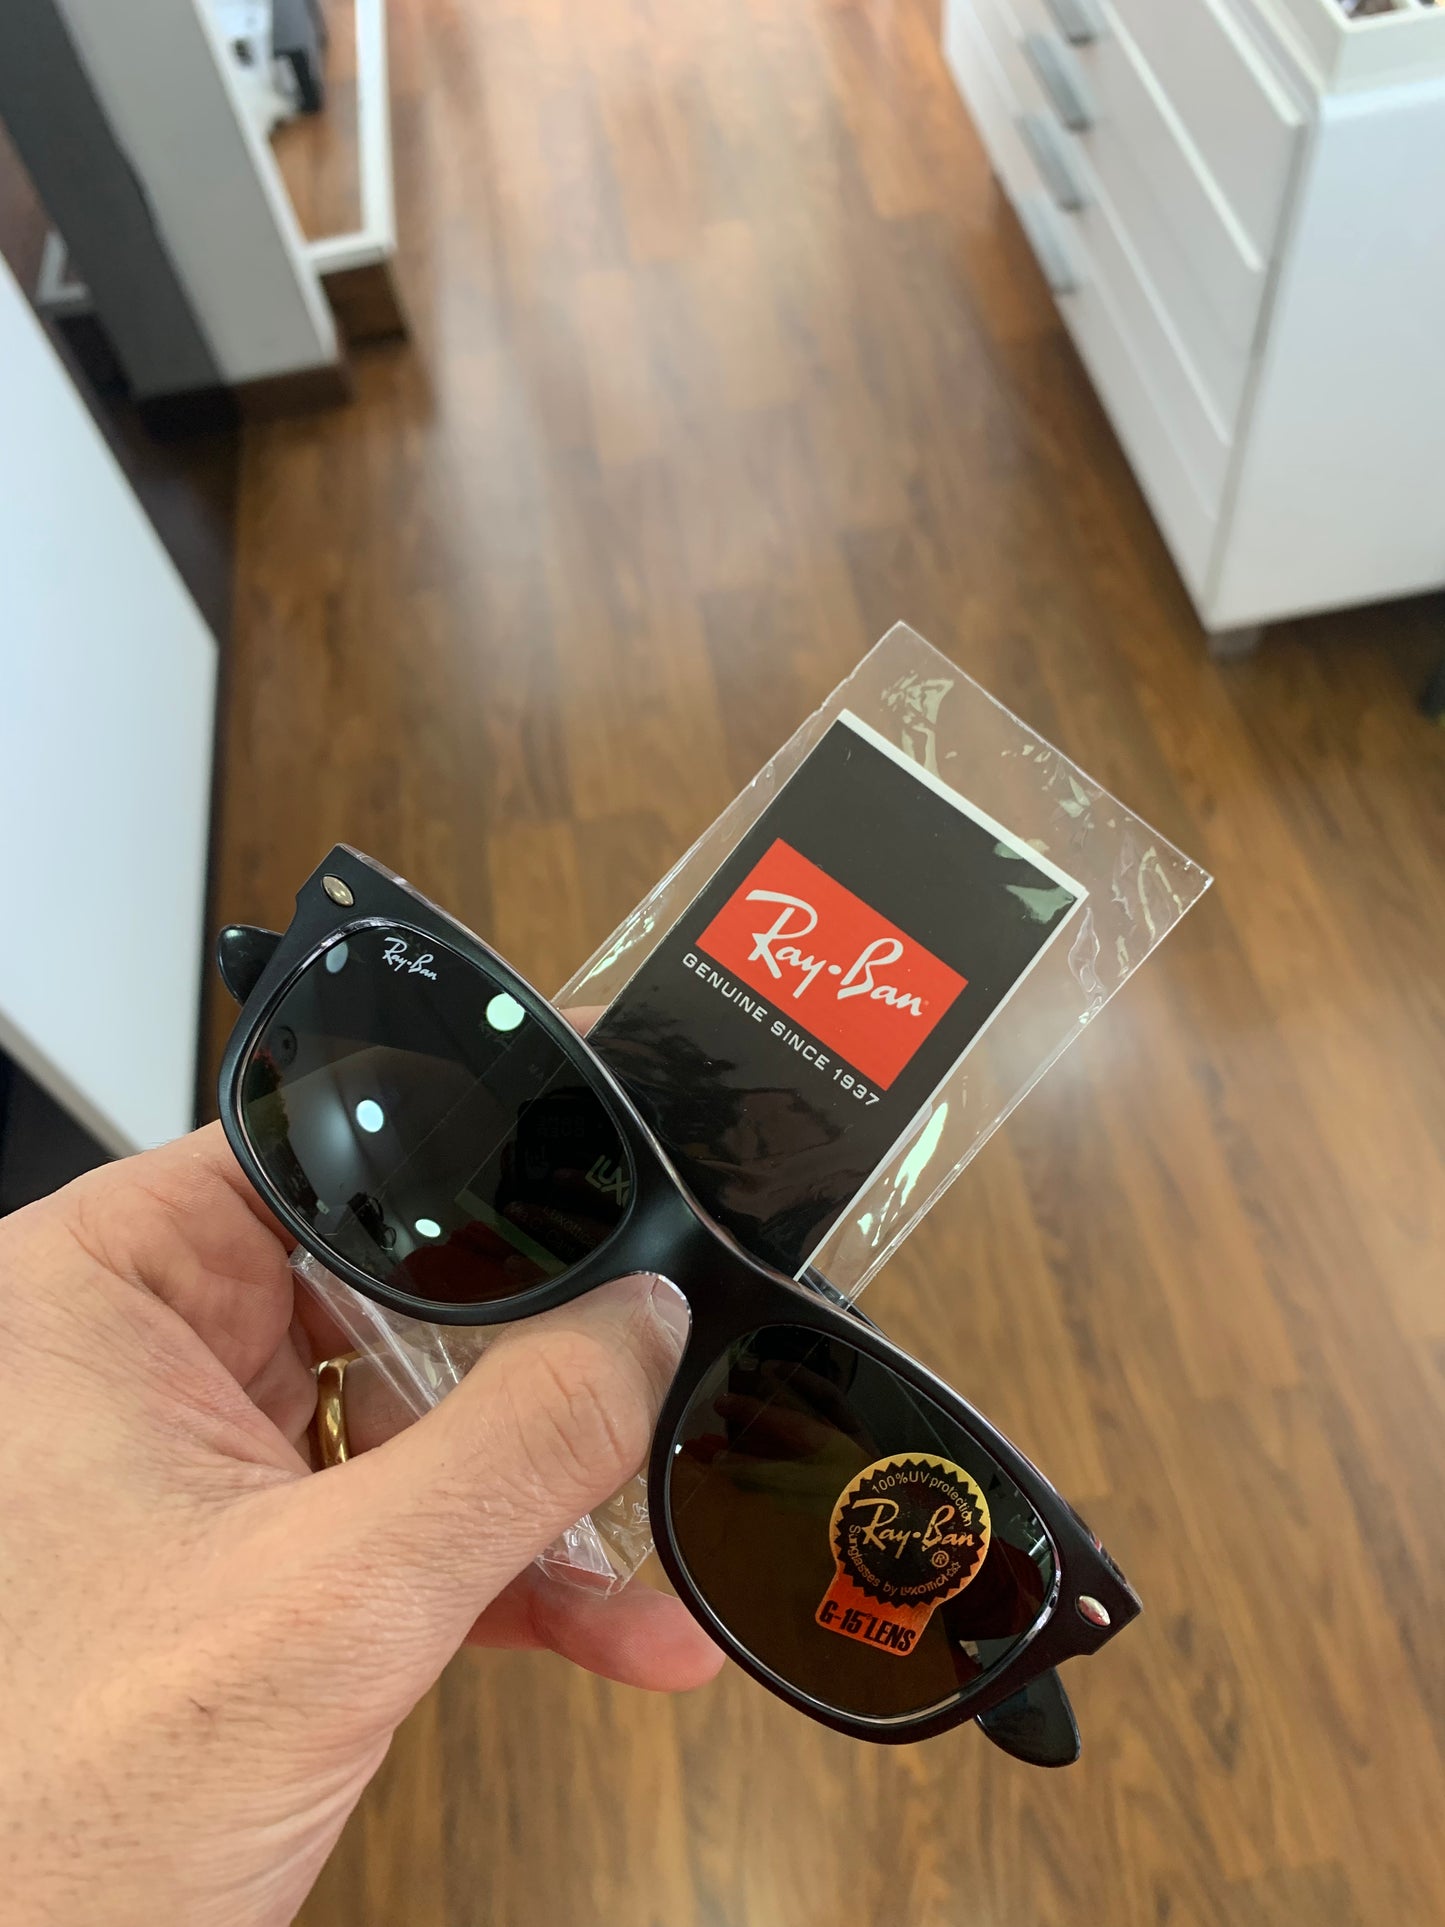 Ray Ban second Life